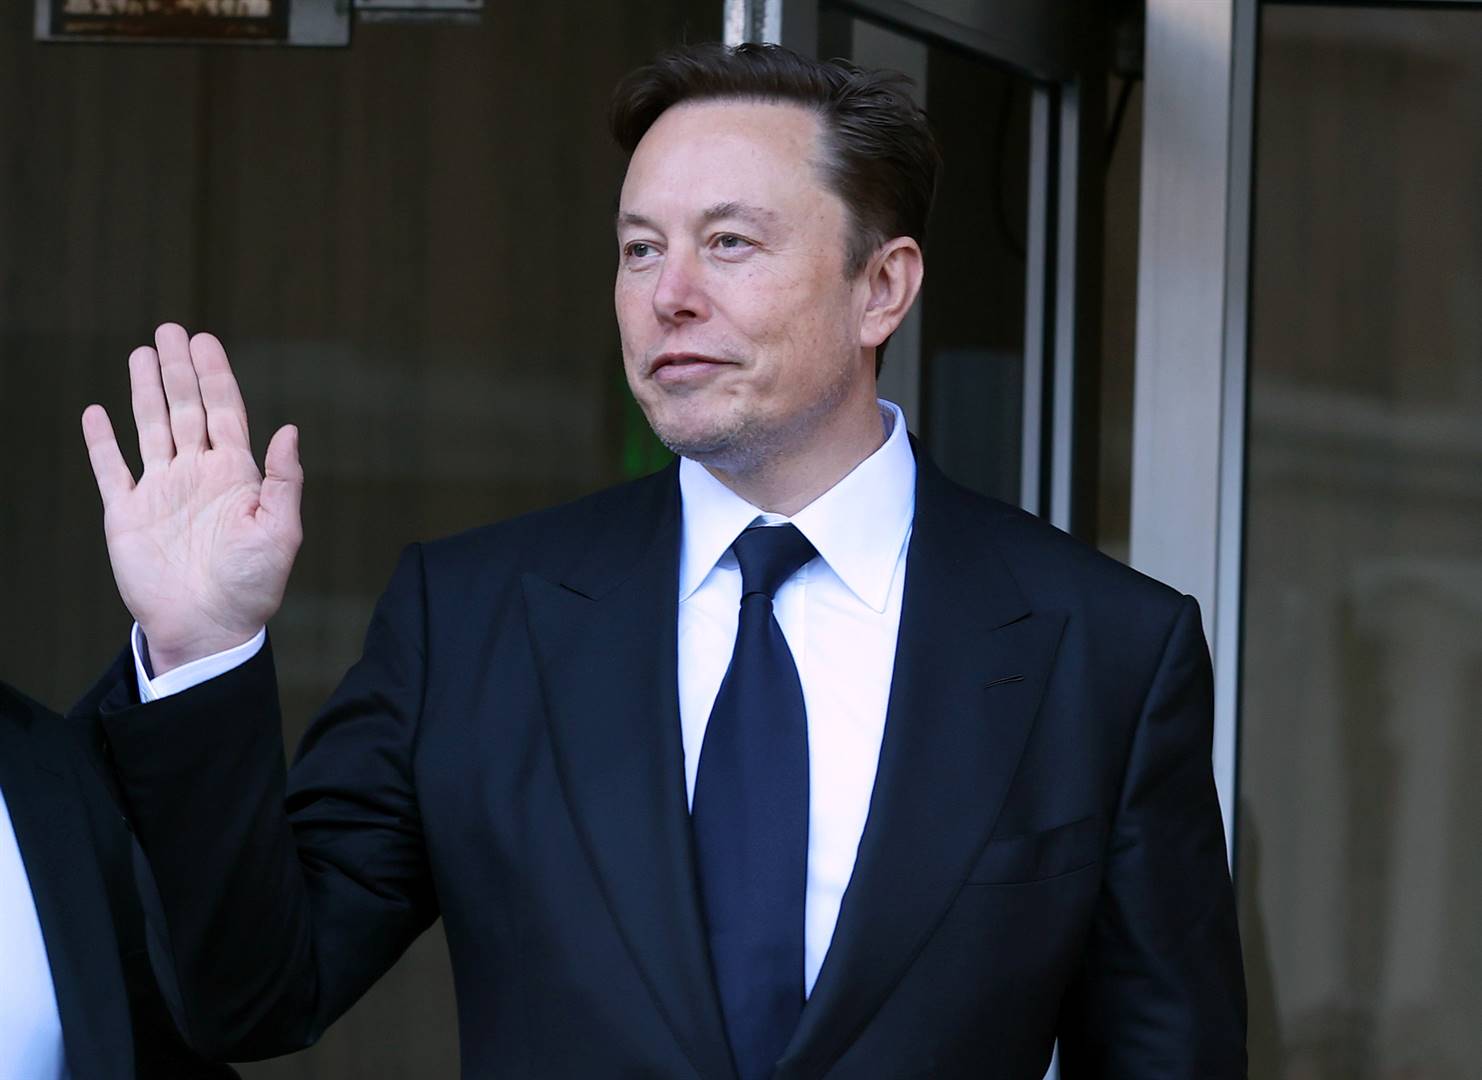 Elon Musk late accused the US-based Anti-Defamation League (ADL) of making unfounded complaints against him and X.